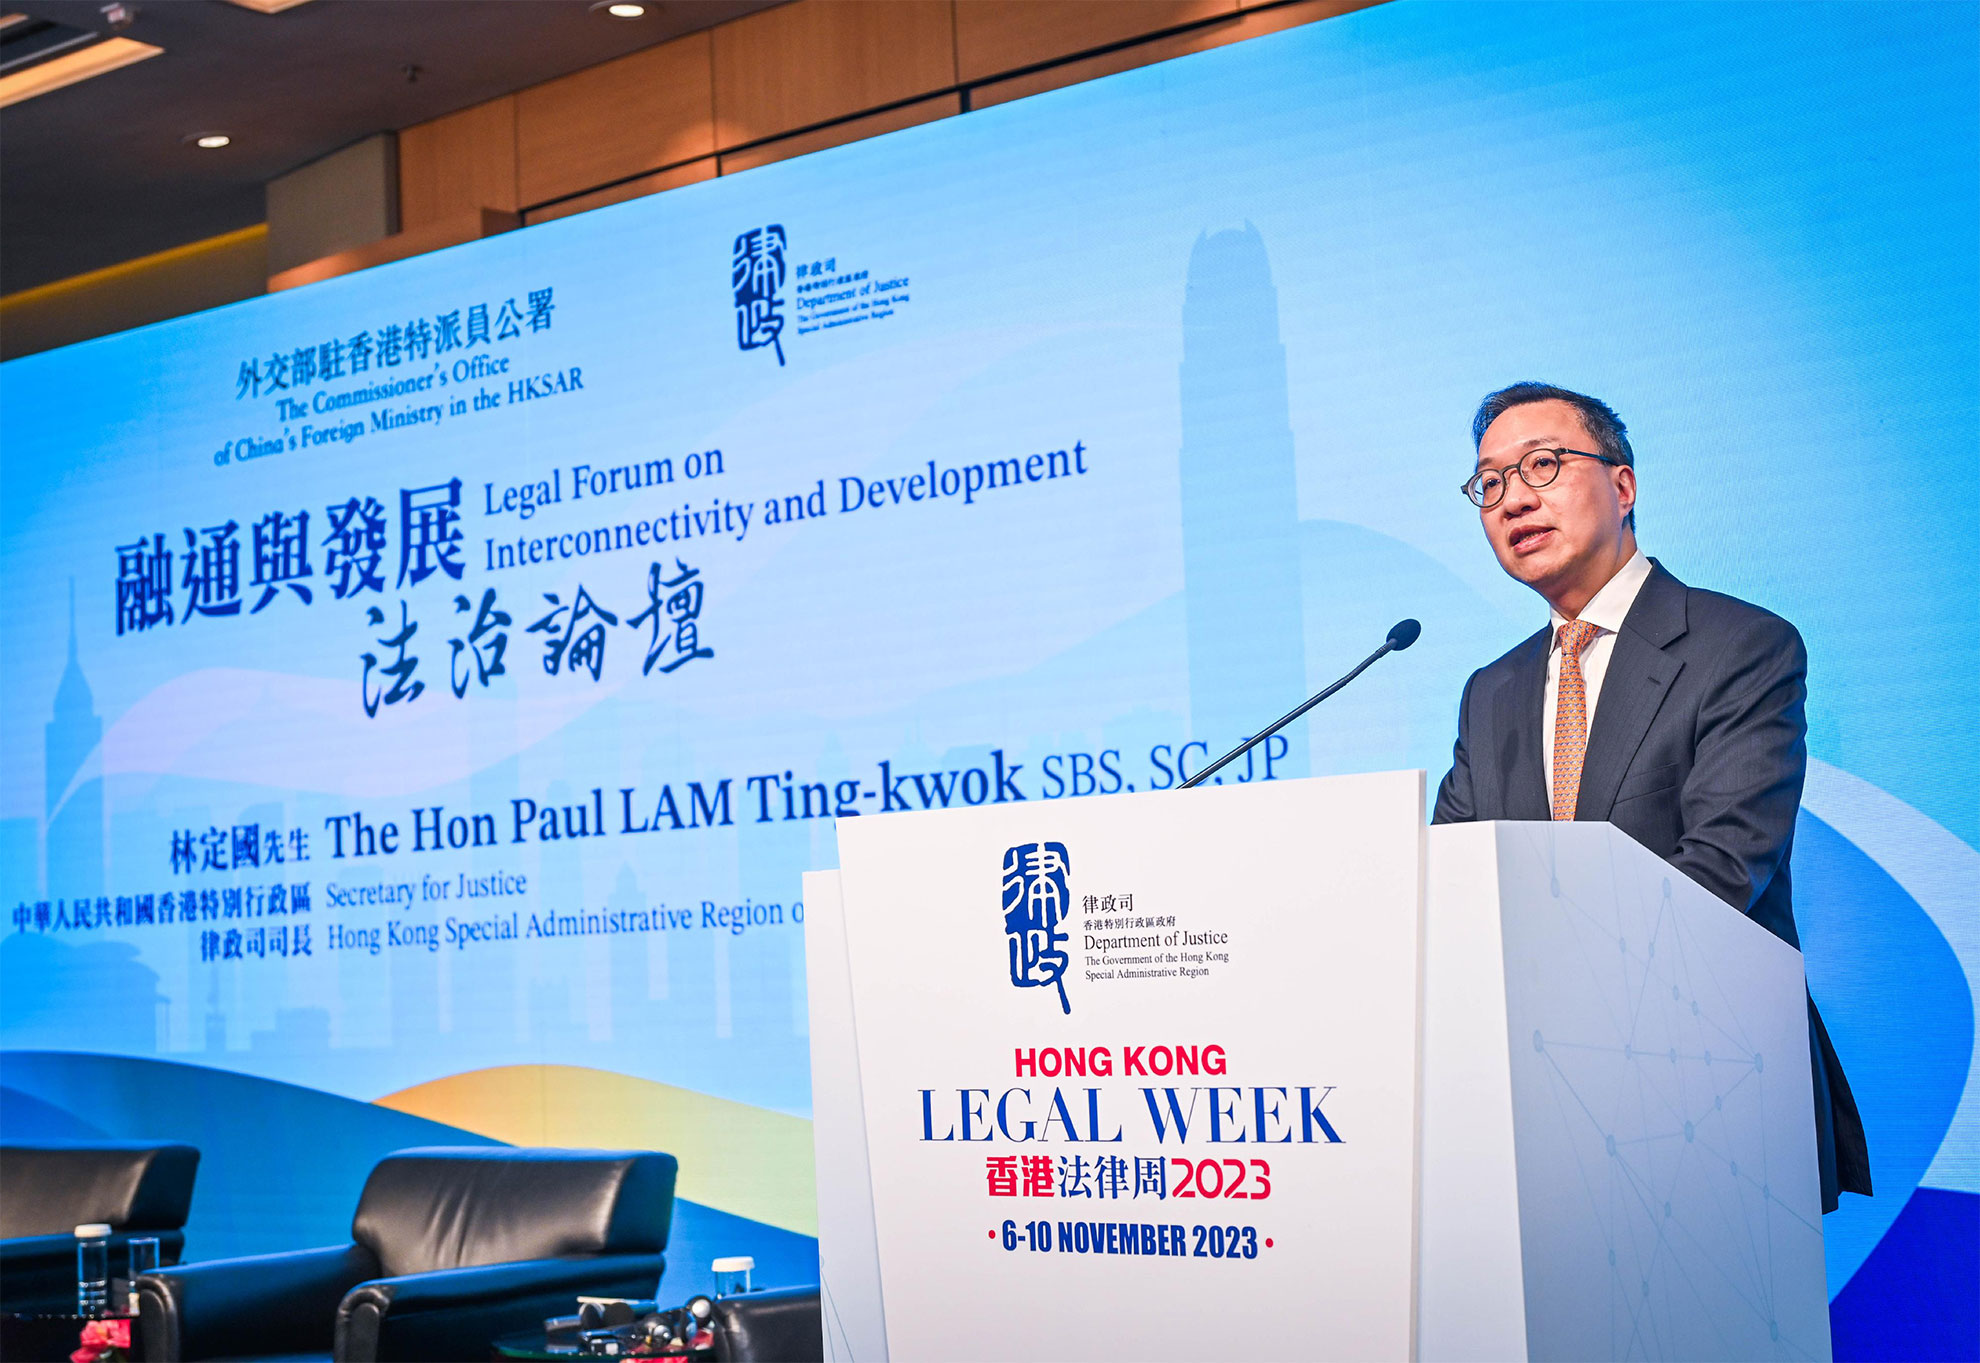 Speech by SJ at Legal Forum on Interconnectivity and Development